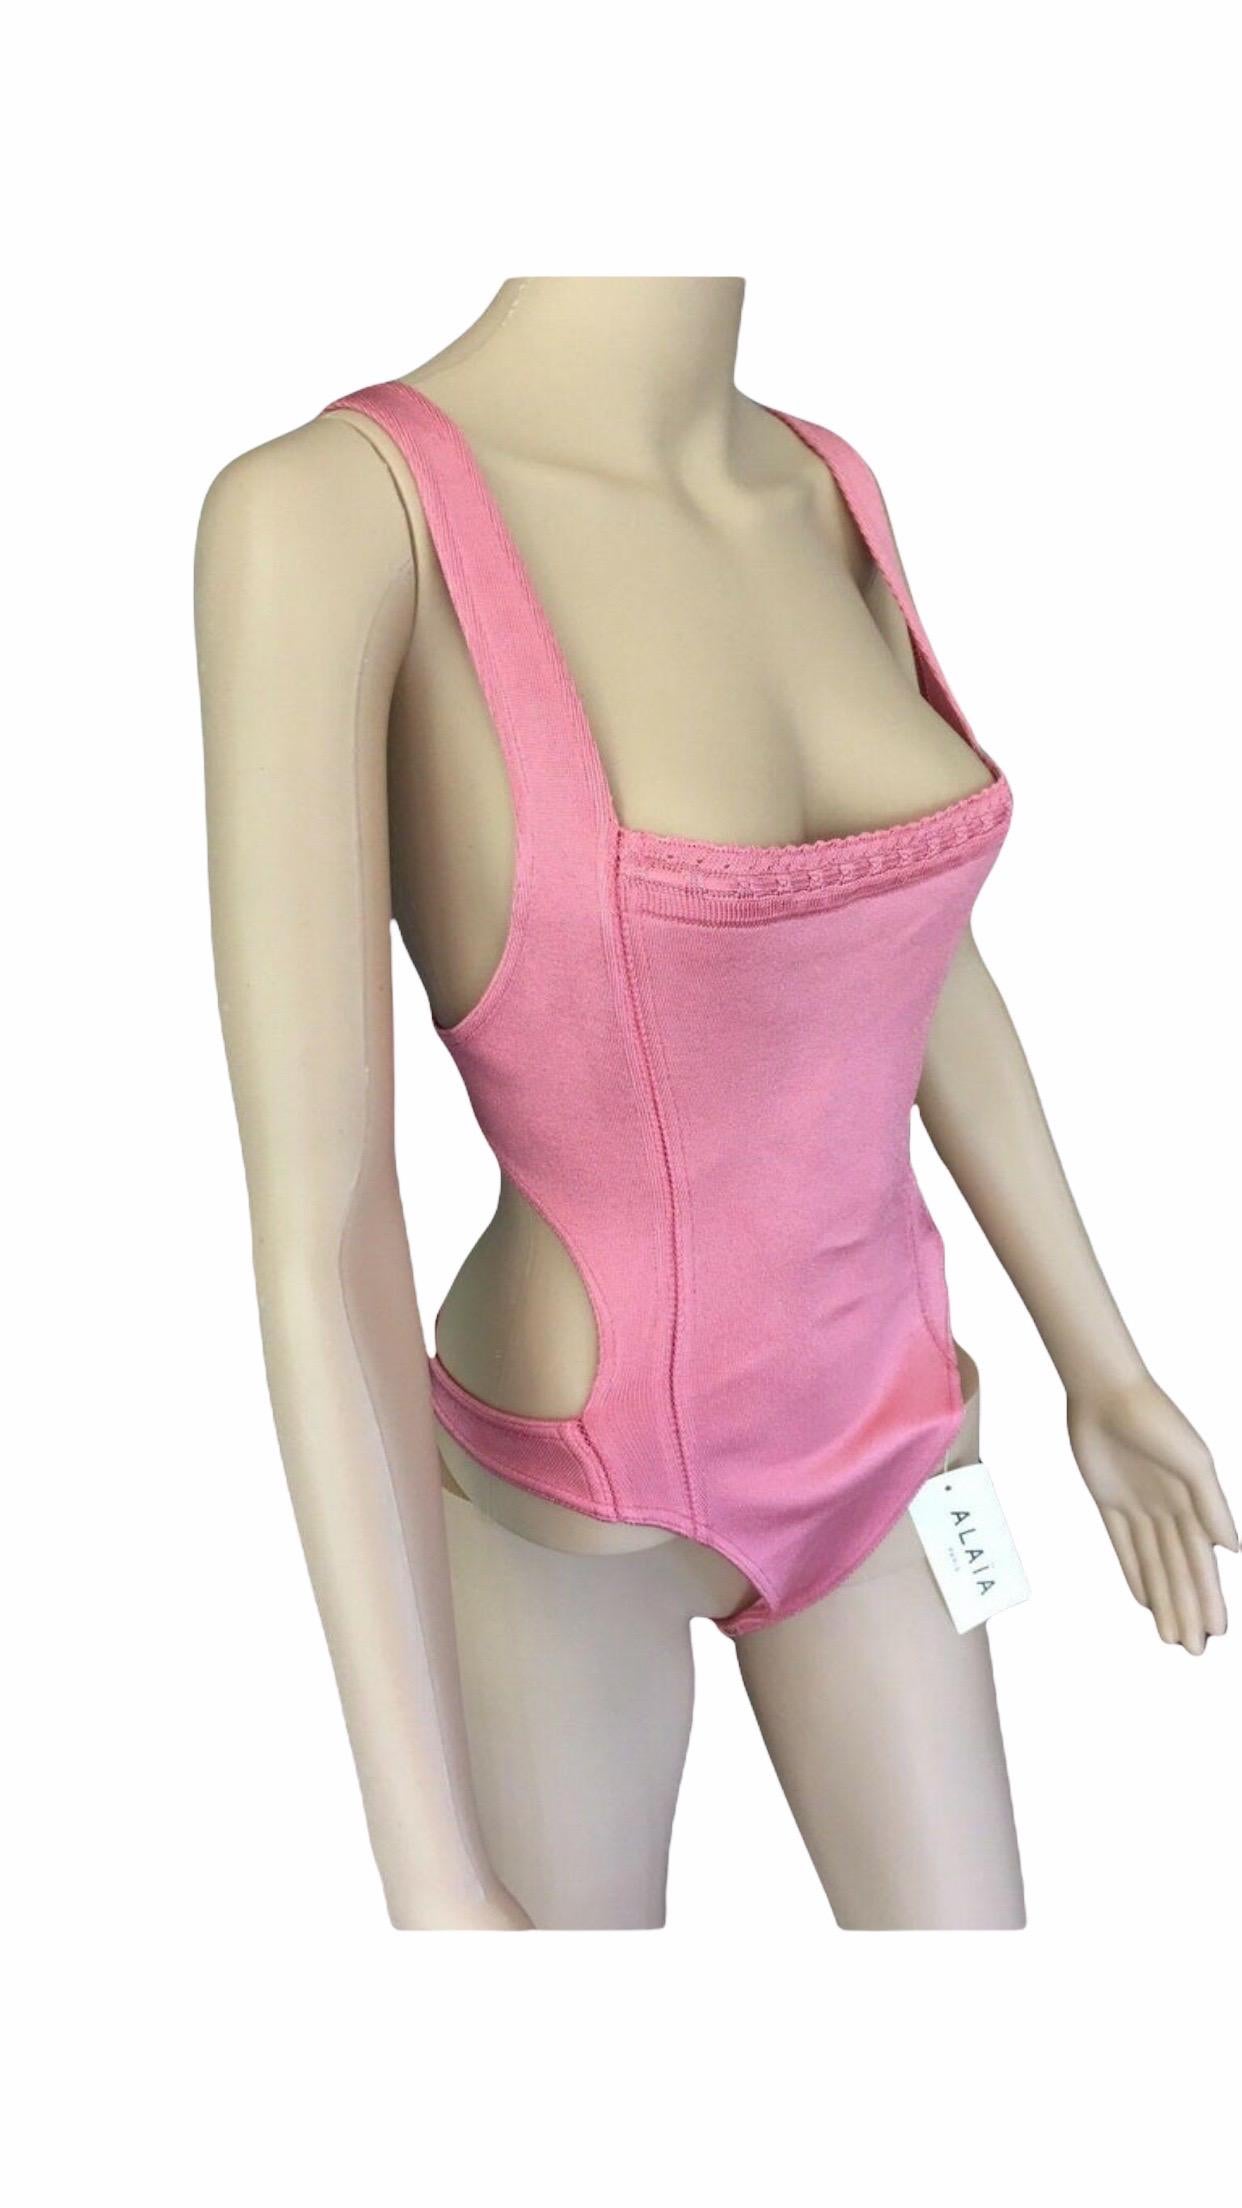 New Azzedine Alaia Sexy Vintage Bodysuit

Pink Alaïa knit bodysuit with square neck, clasp closure at inseam and hook-and-eye closure at open back.

All Eyes on Alaïa

For the last half-century, the world’s most fashionable and adventuresome women